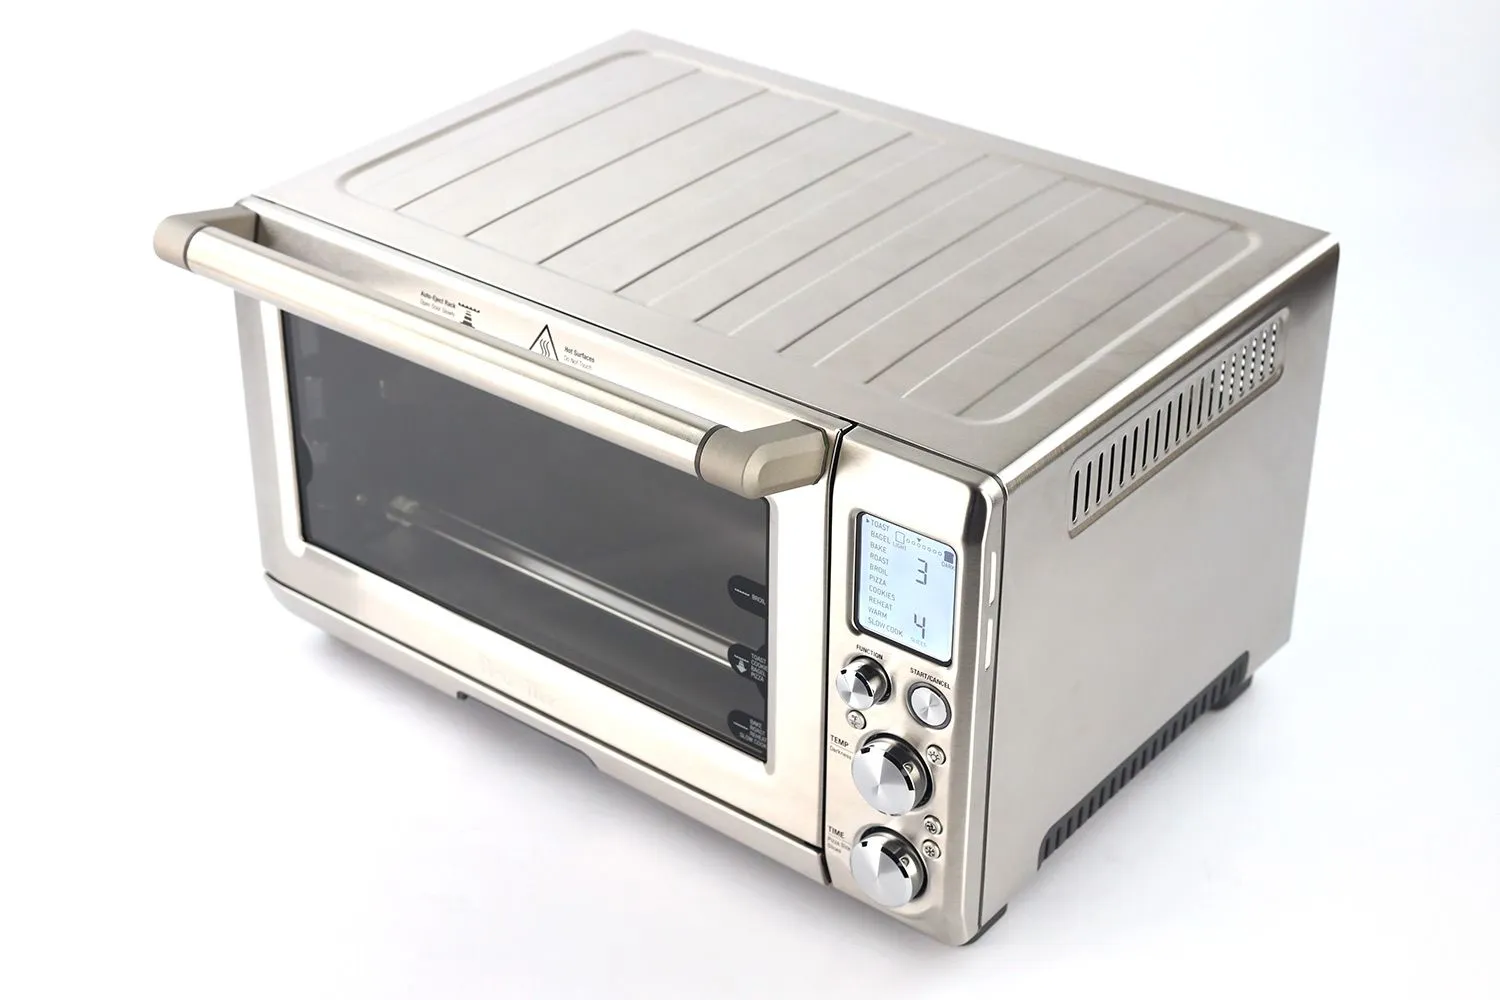 the Smart Oven™ Pro